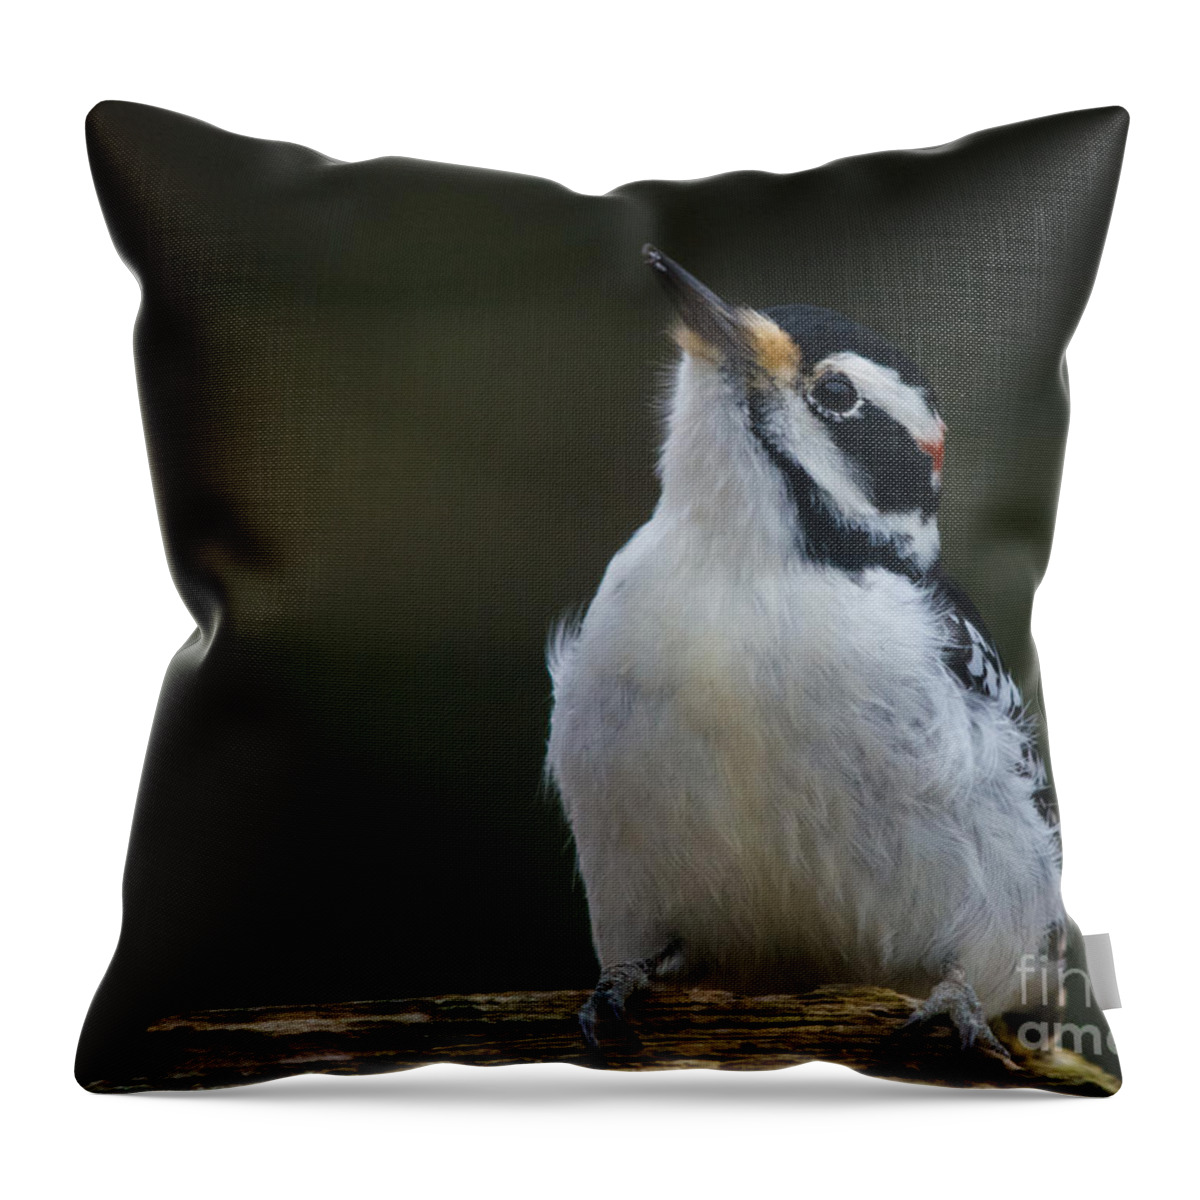  Throw Pillow featuring the photograph Mr Hairy Profile by Cheryl Baxter